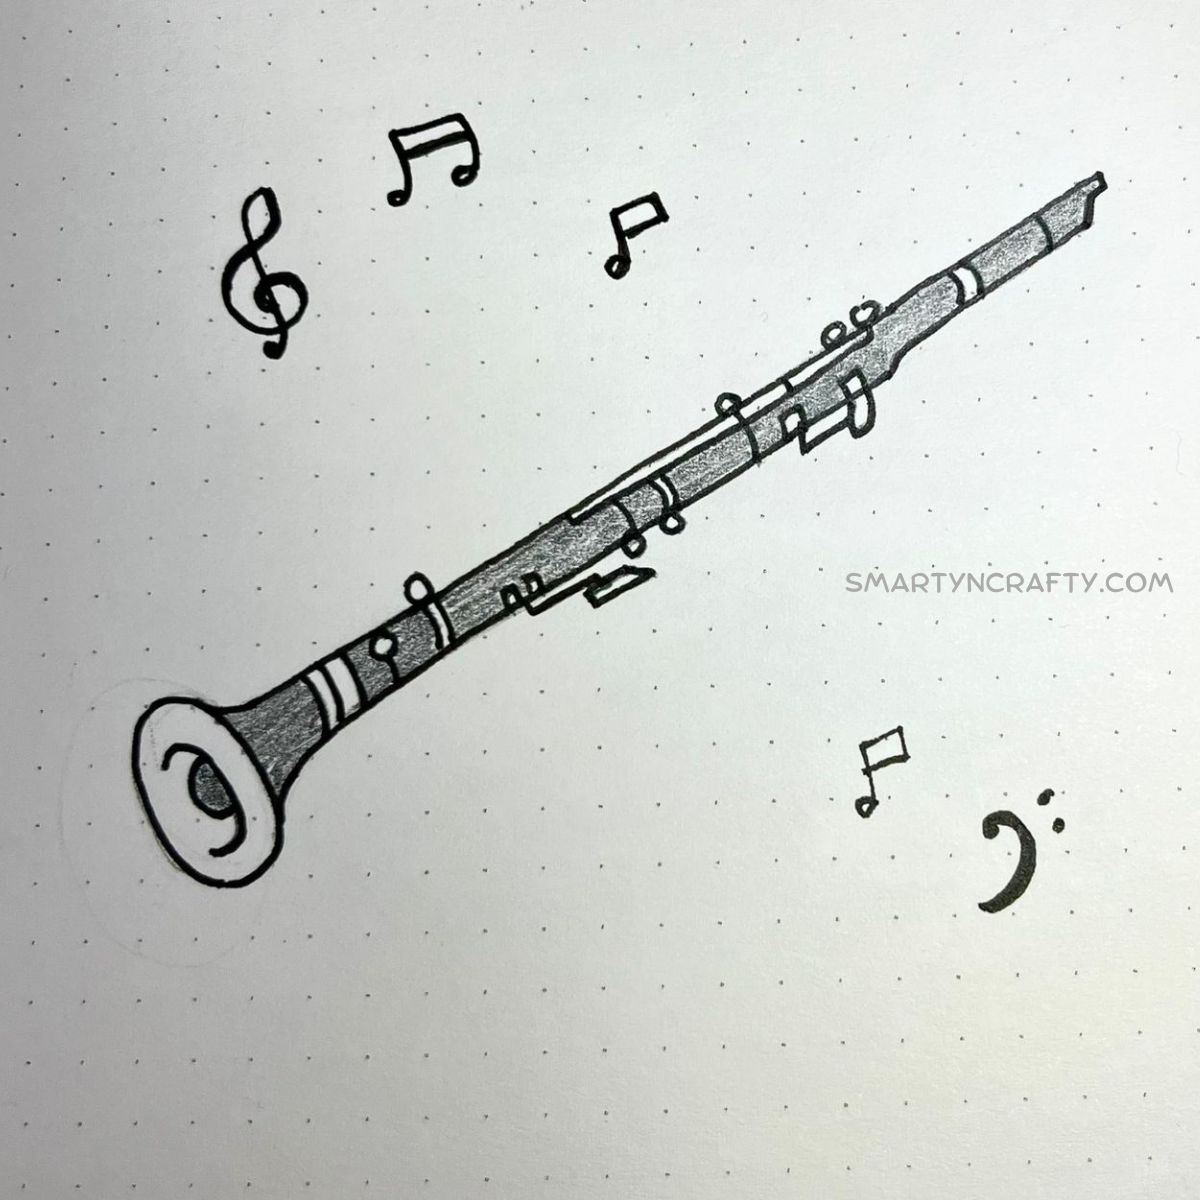 how to draw a clarinet